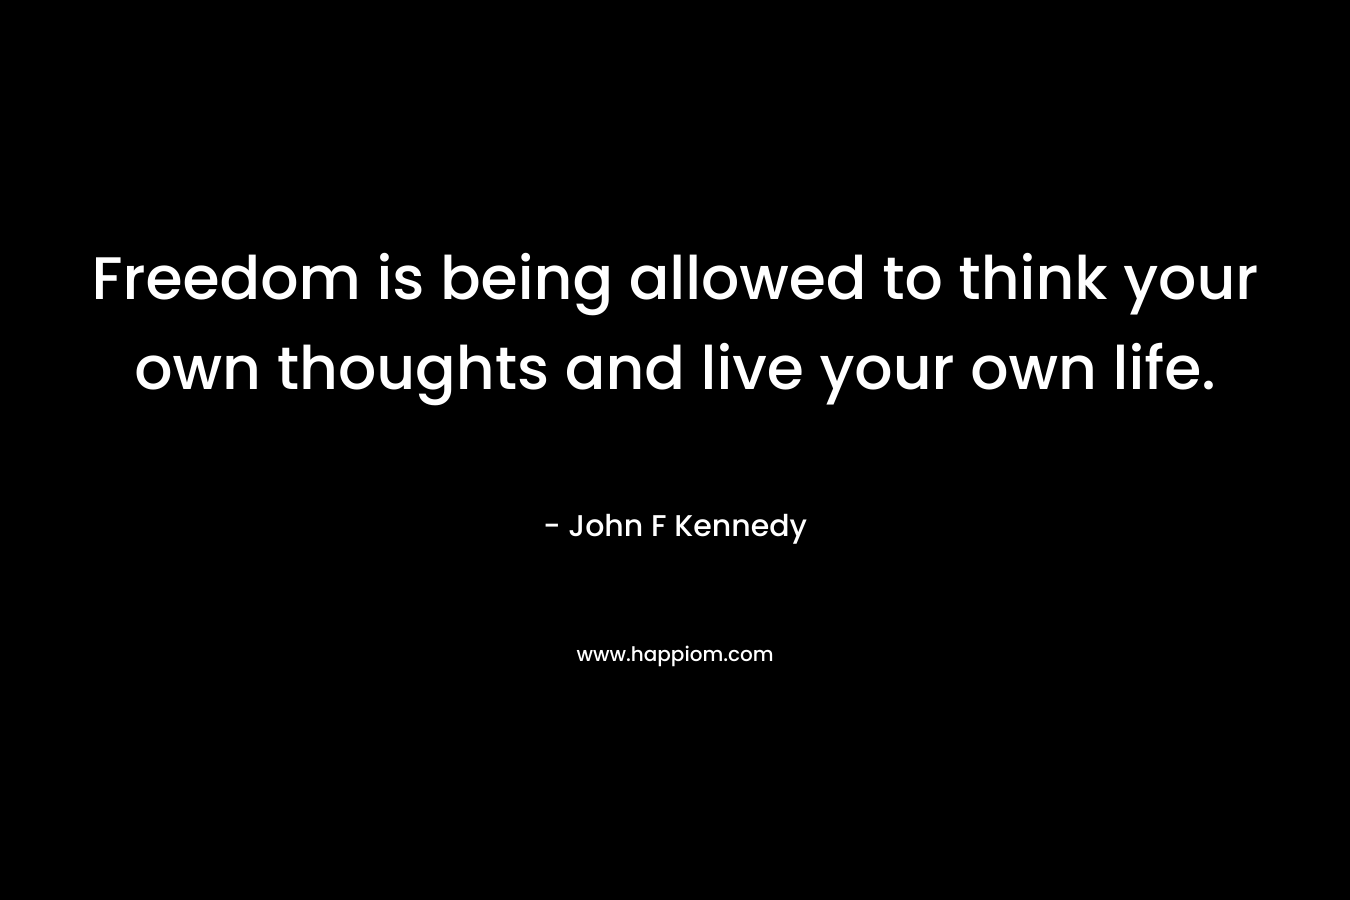 Freedom is being allowed to think your own thoughts and live your own life.